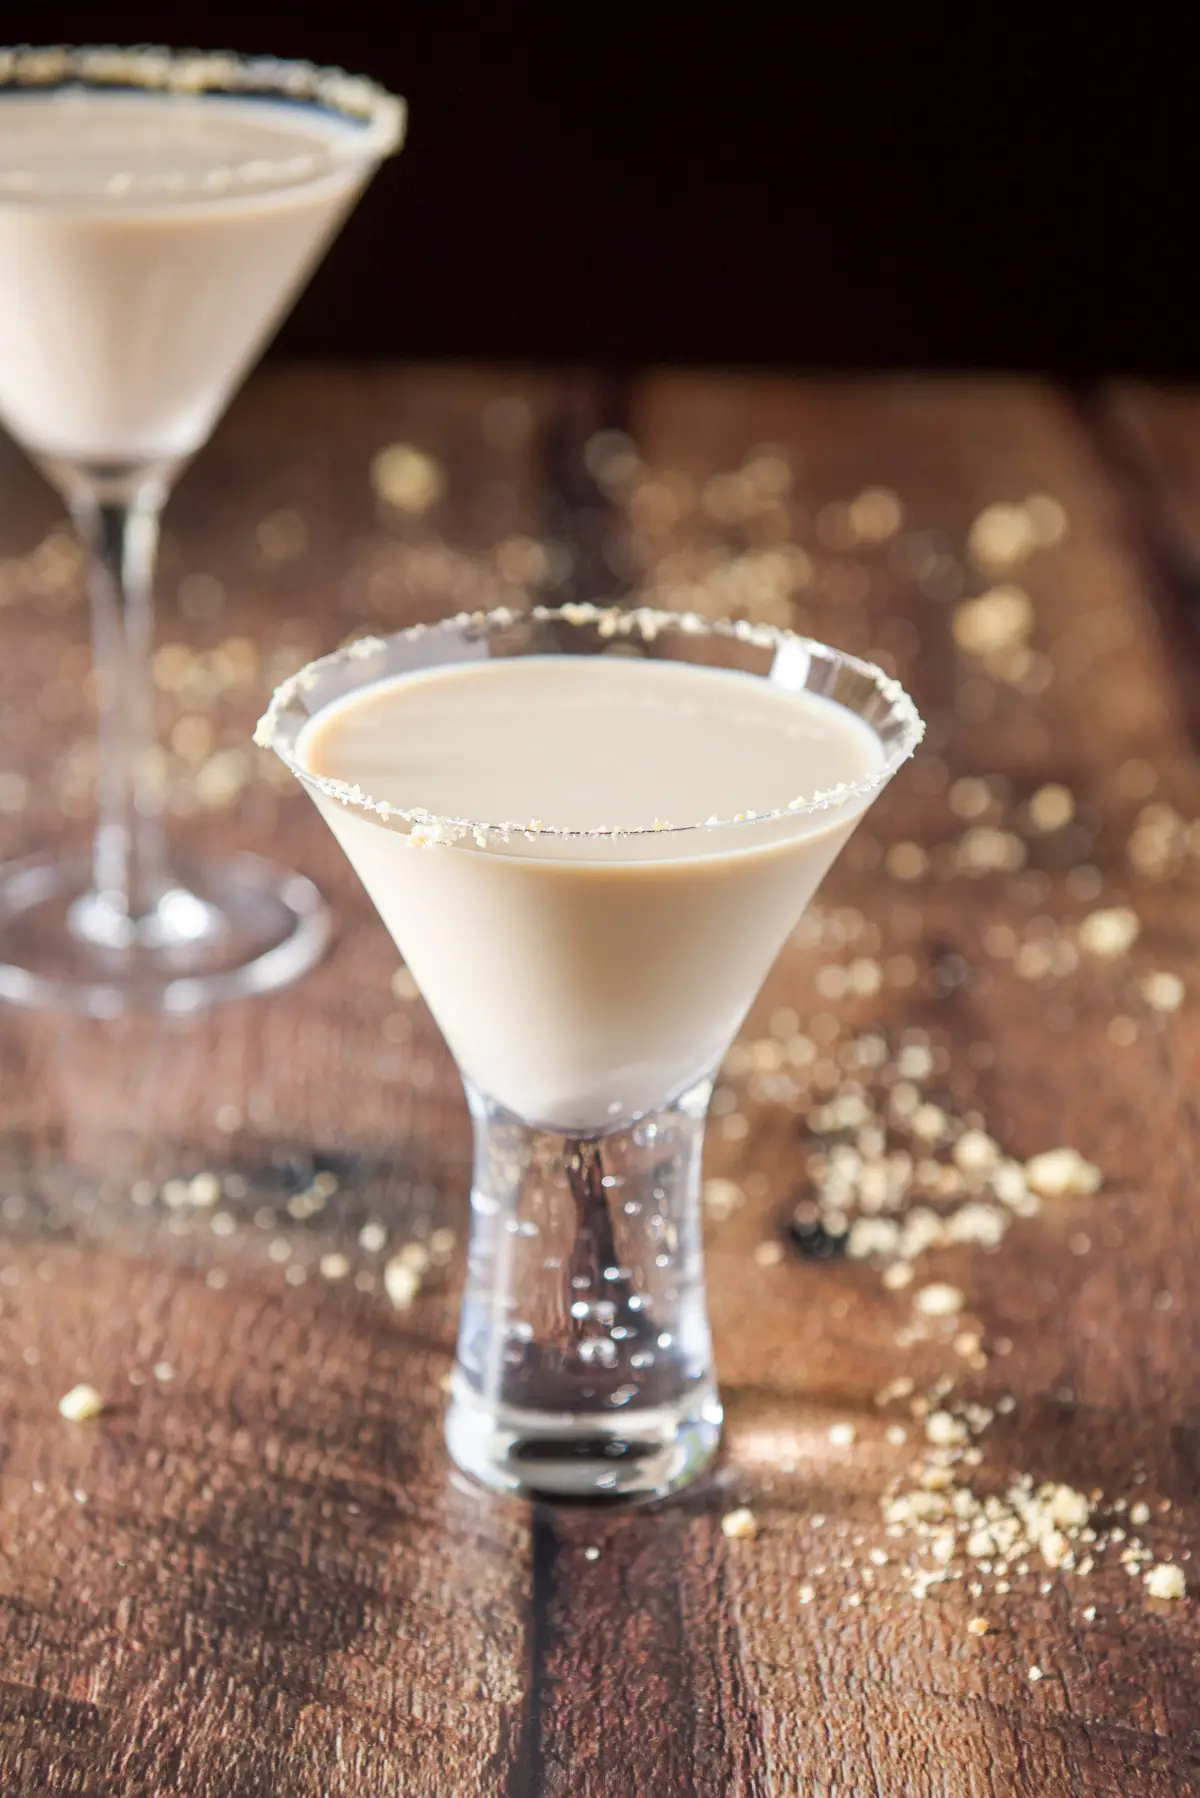 A small bubble glass garnished with cookie crumbs and the cream drink in it. There is a classic martini glass and cookie crumbs on the table behind it